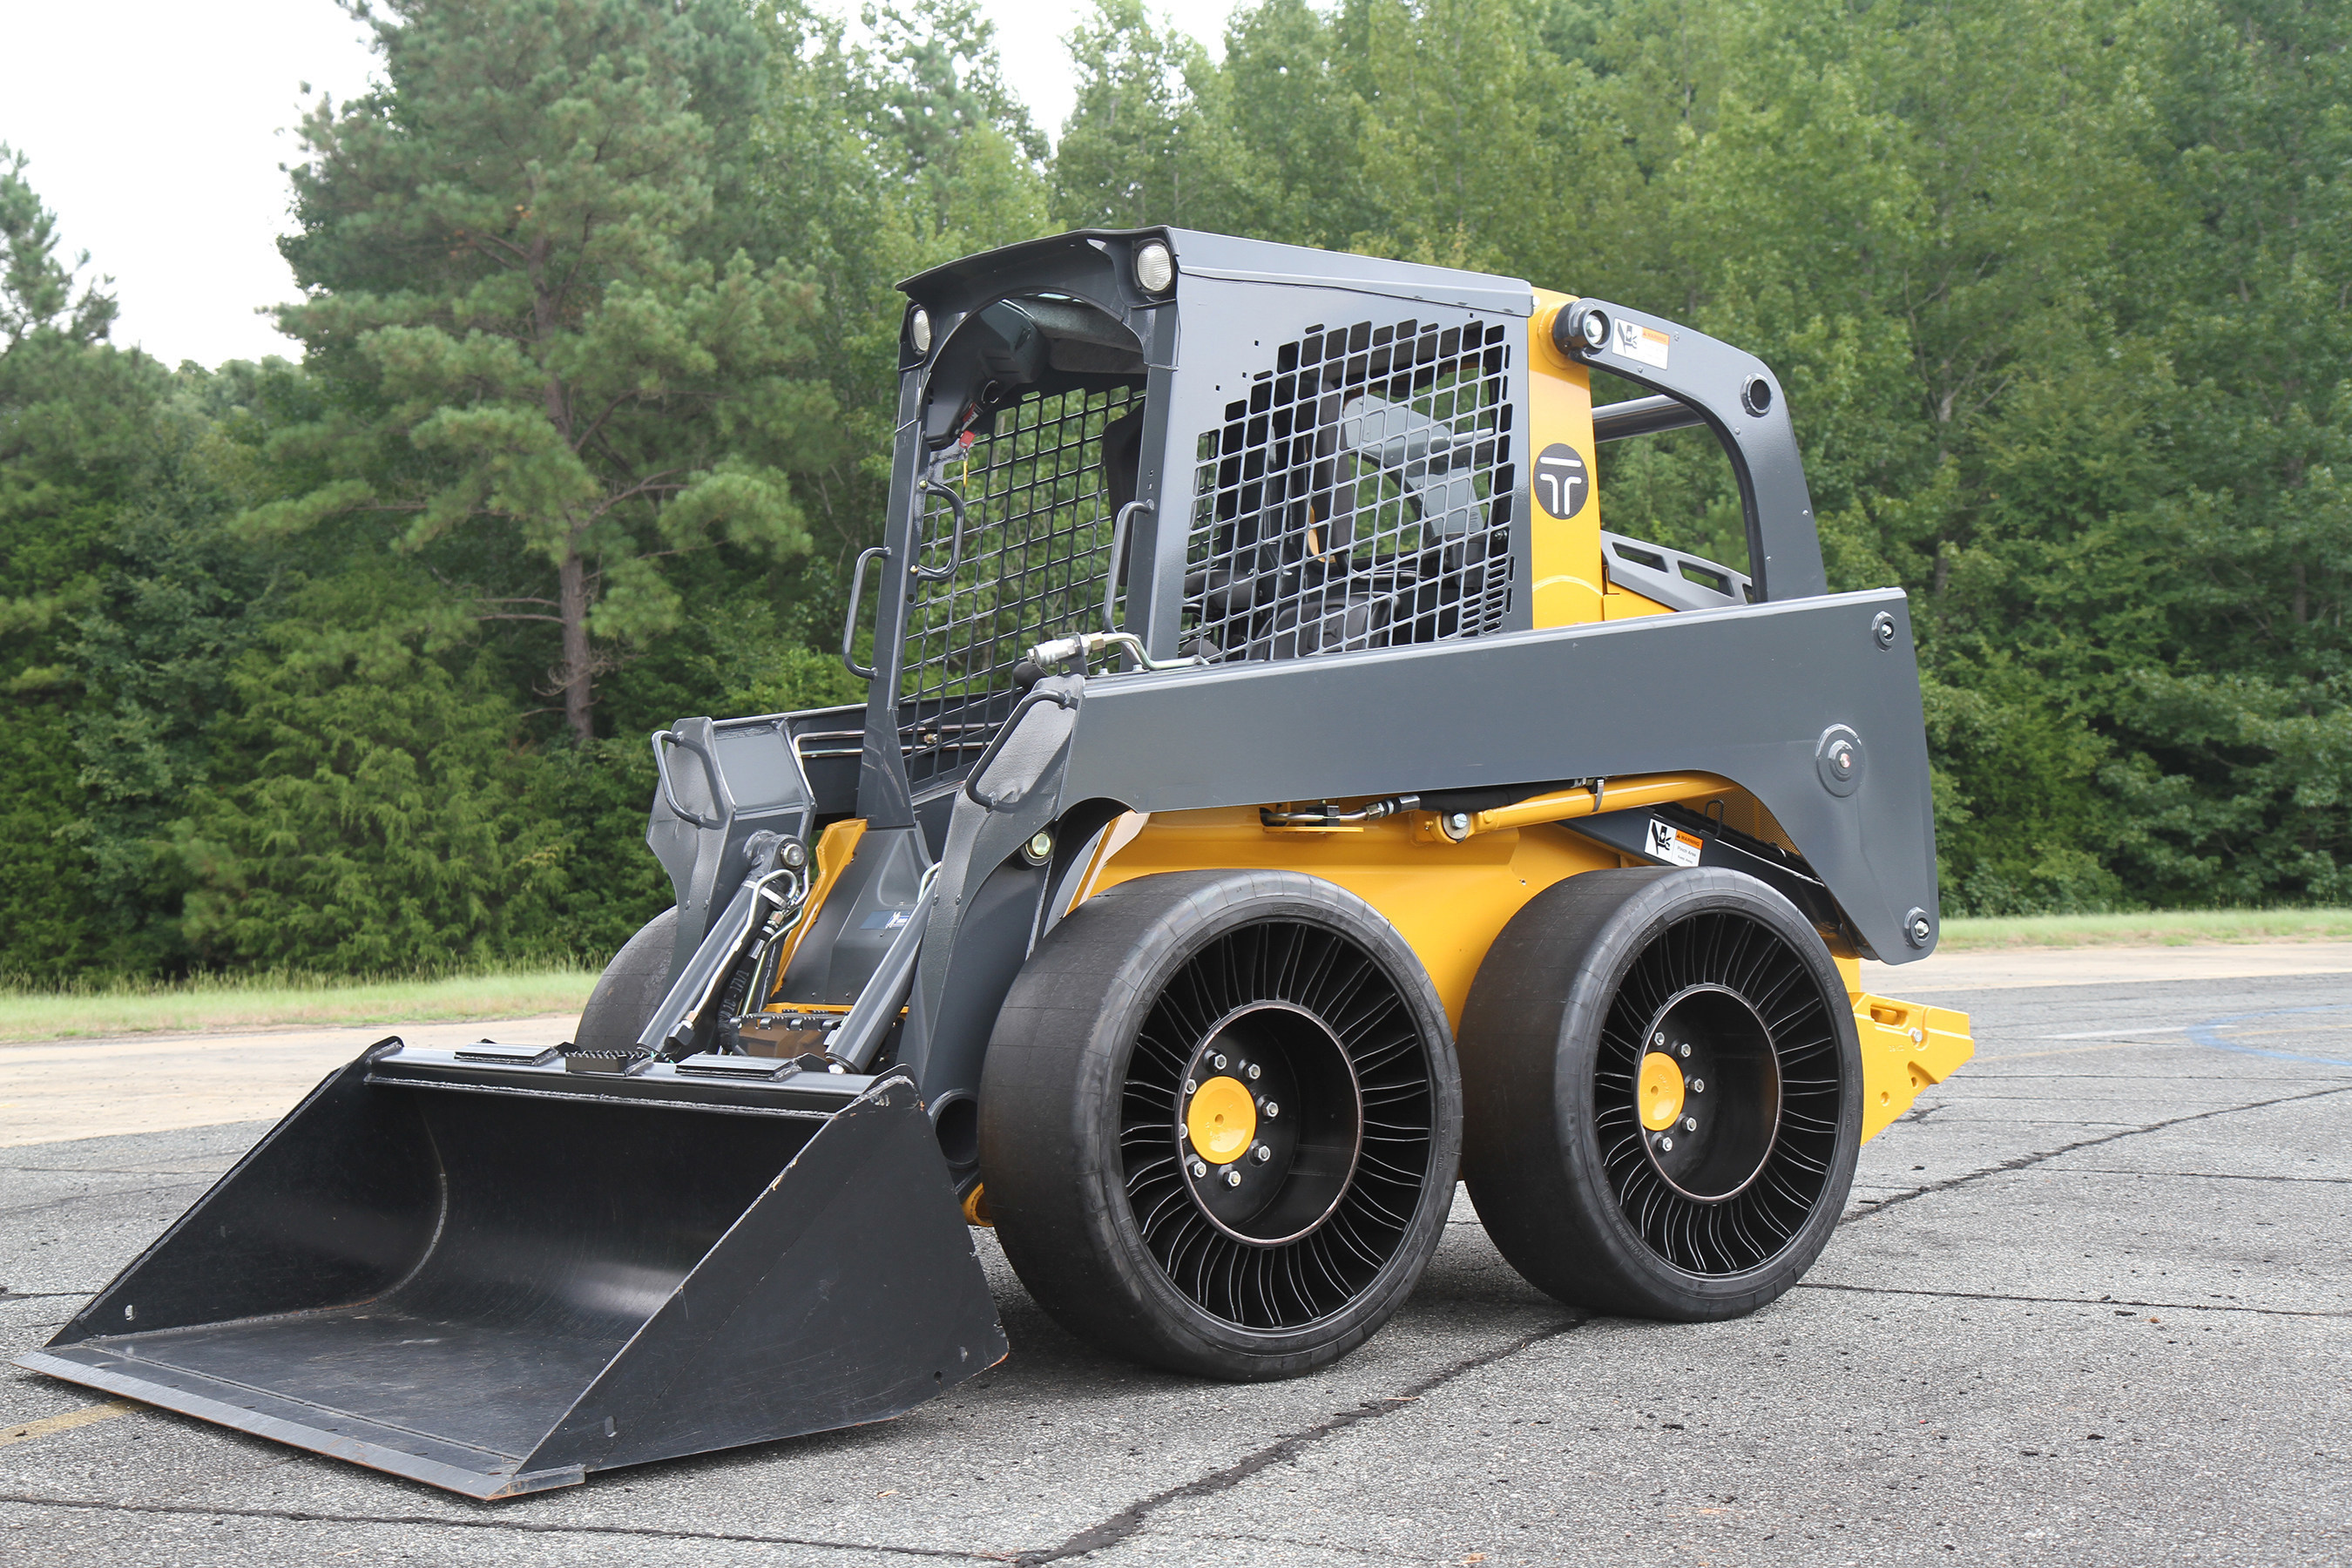 The TWEEL(R) SSL Hard Surface is designed for operators who are involved with construction, transfer stations, waste handling, pavement maintenance or material handling and benefit from a hard surface version of an airless radial skid steer tire.